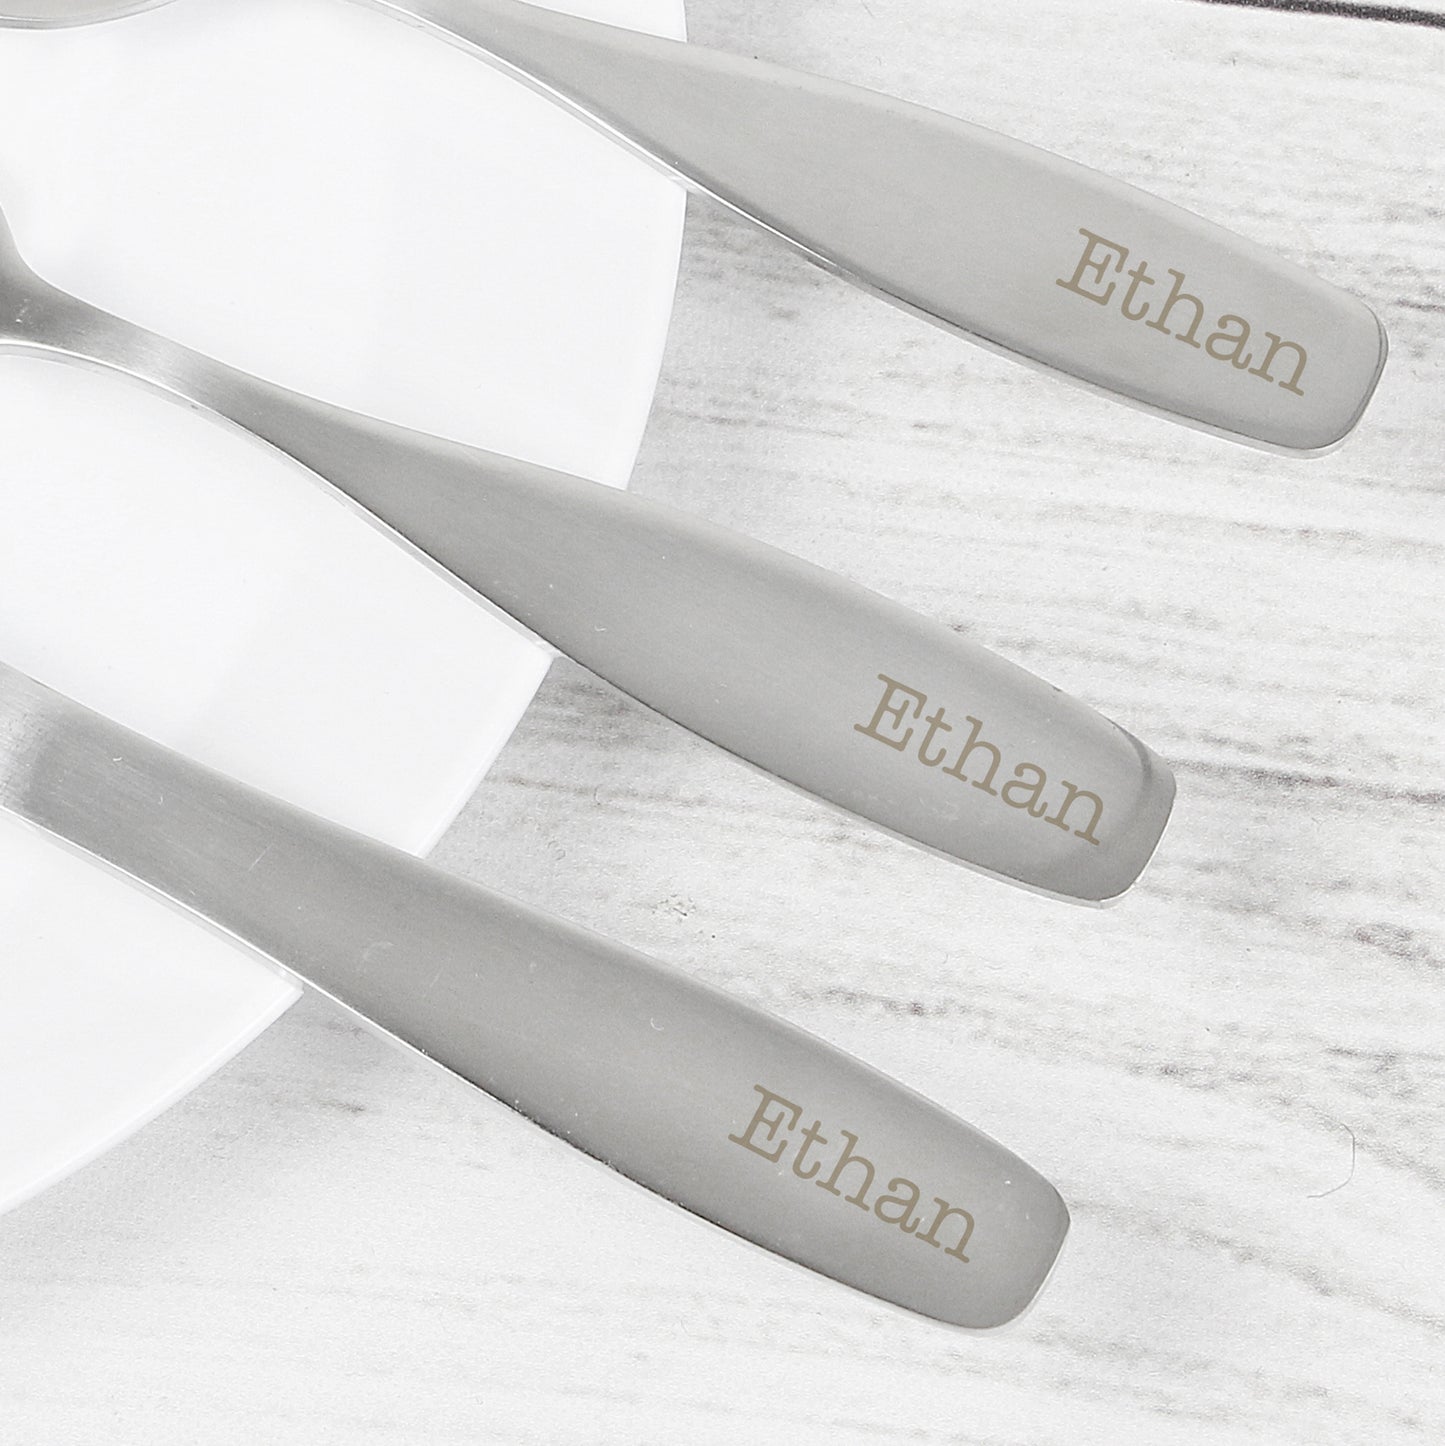 Personalised Three Piece Cutlery Set for Children